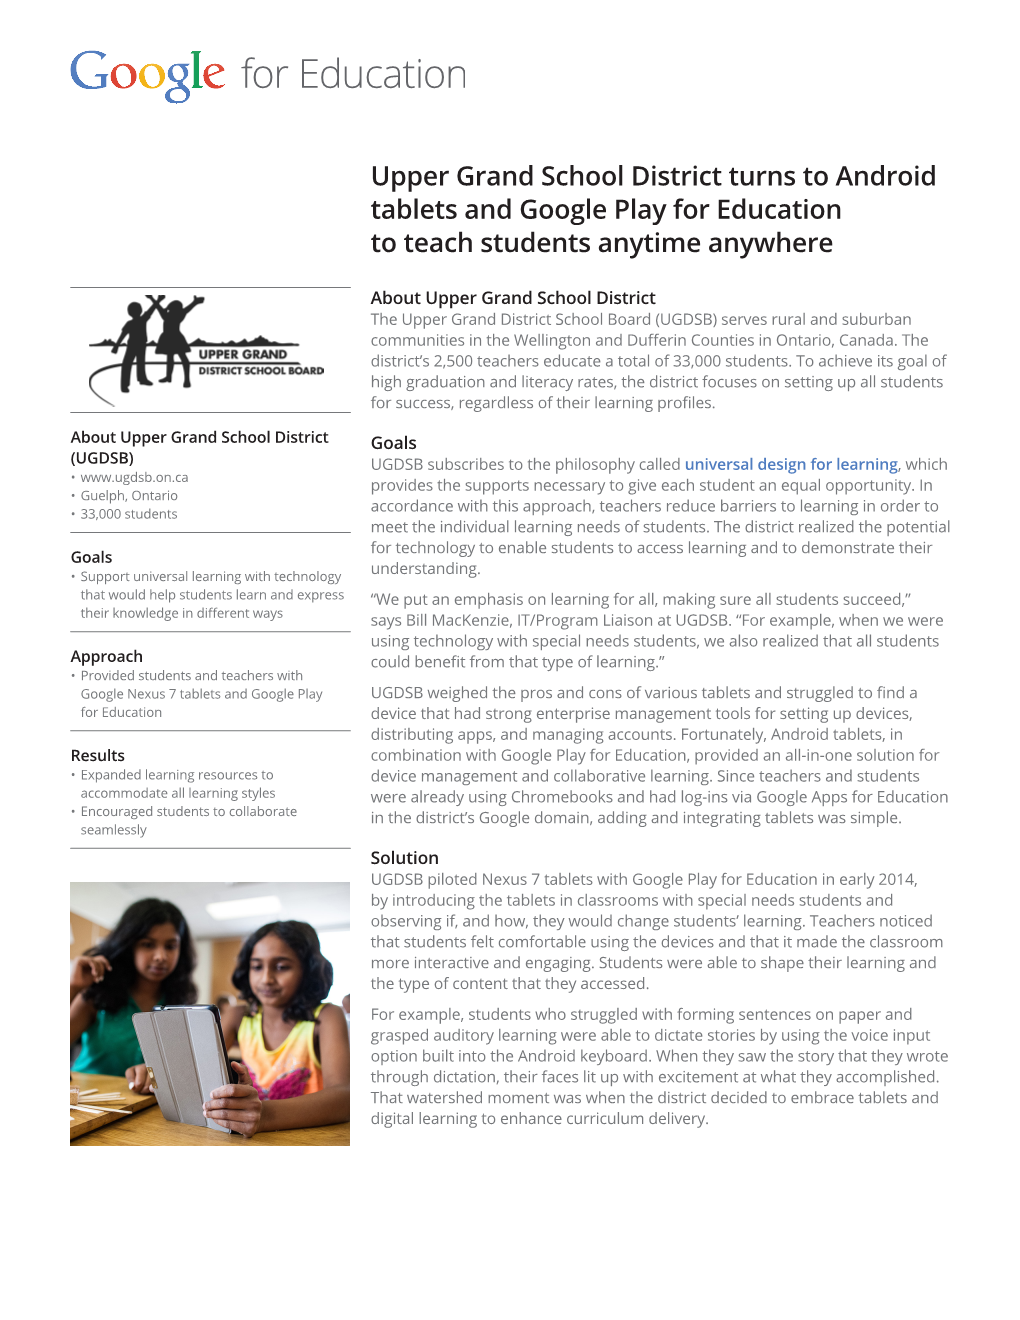 Upper Grand School District Turns to Android Tablets and Google Play for Education to Teach Students Anytime Anywhere